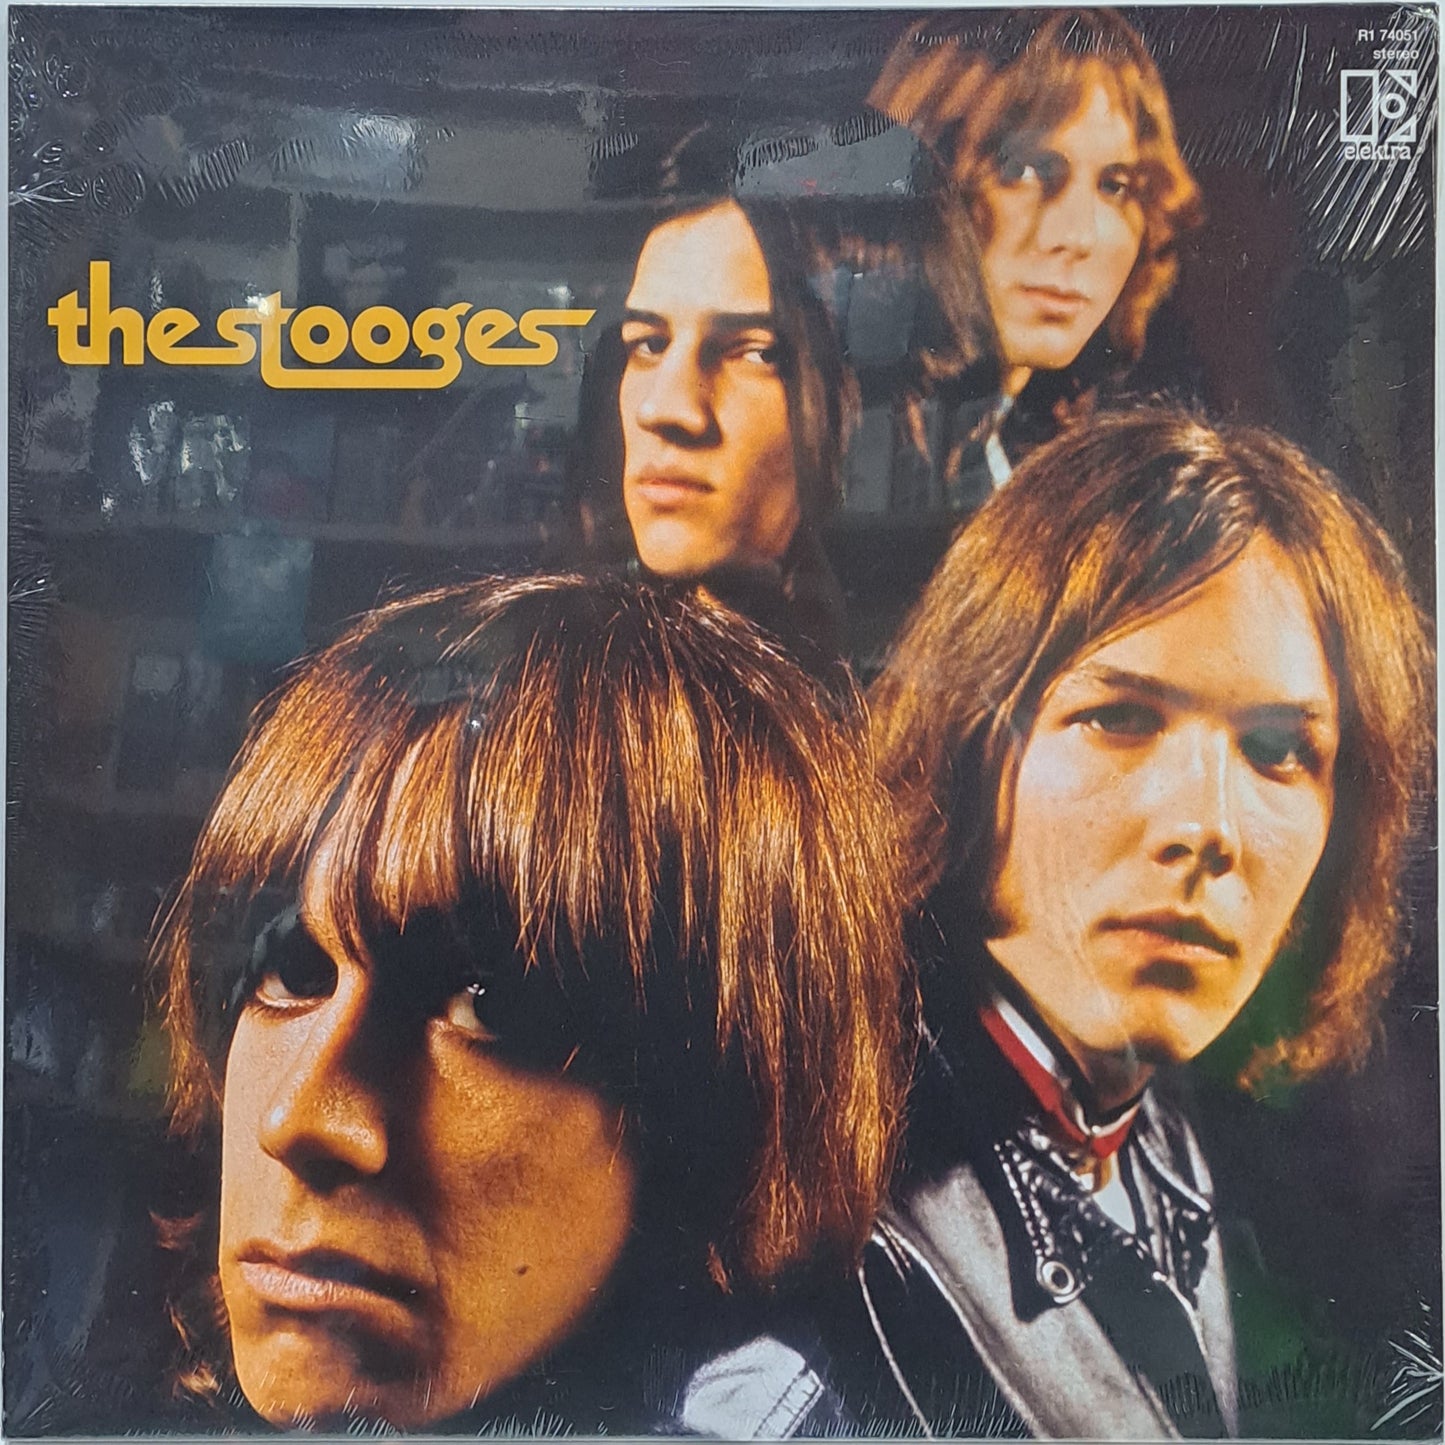 THE STOOGES - THE STOOGES  LP